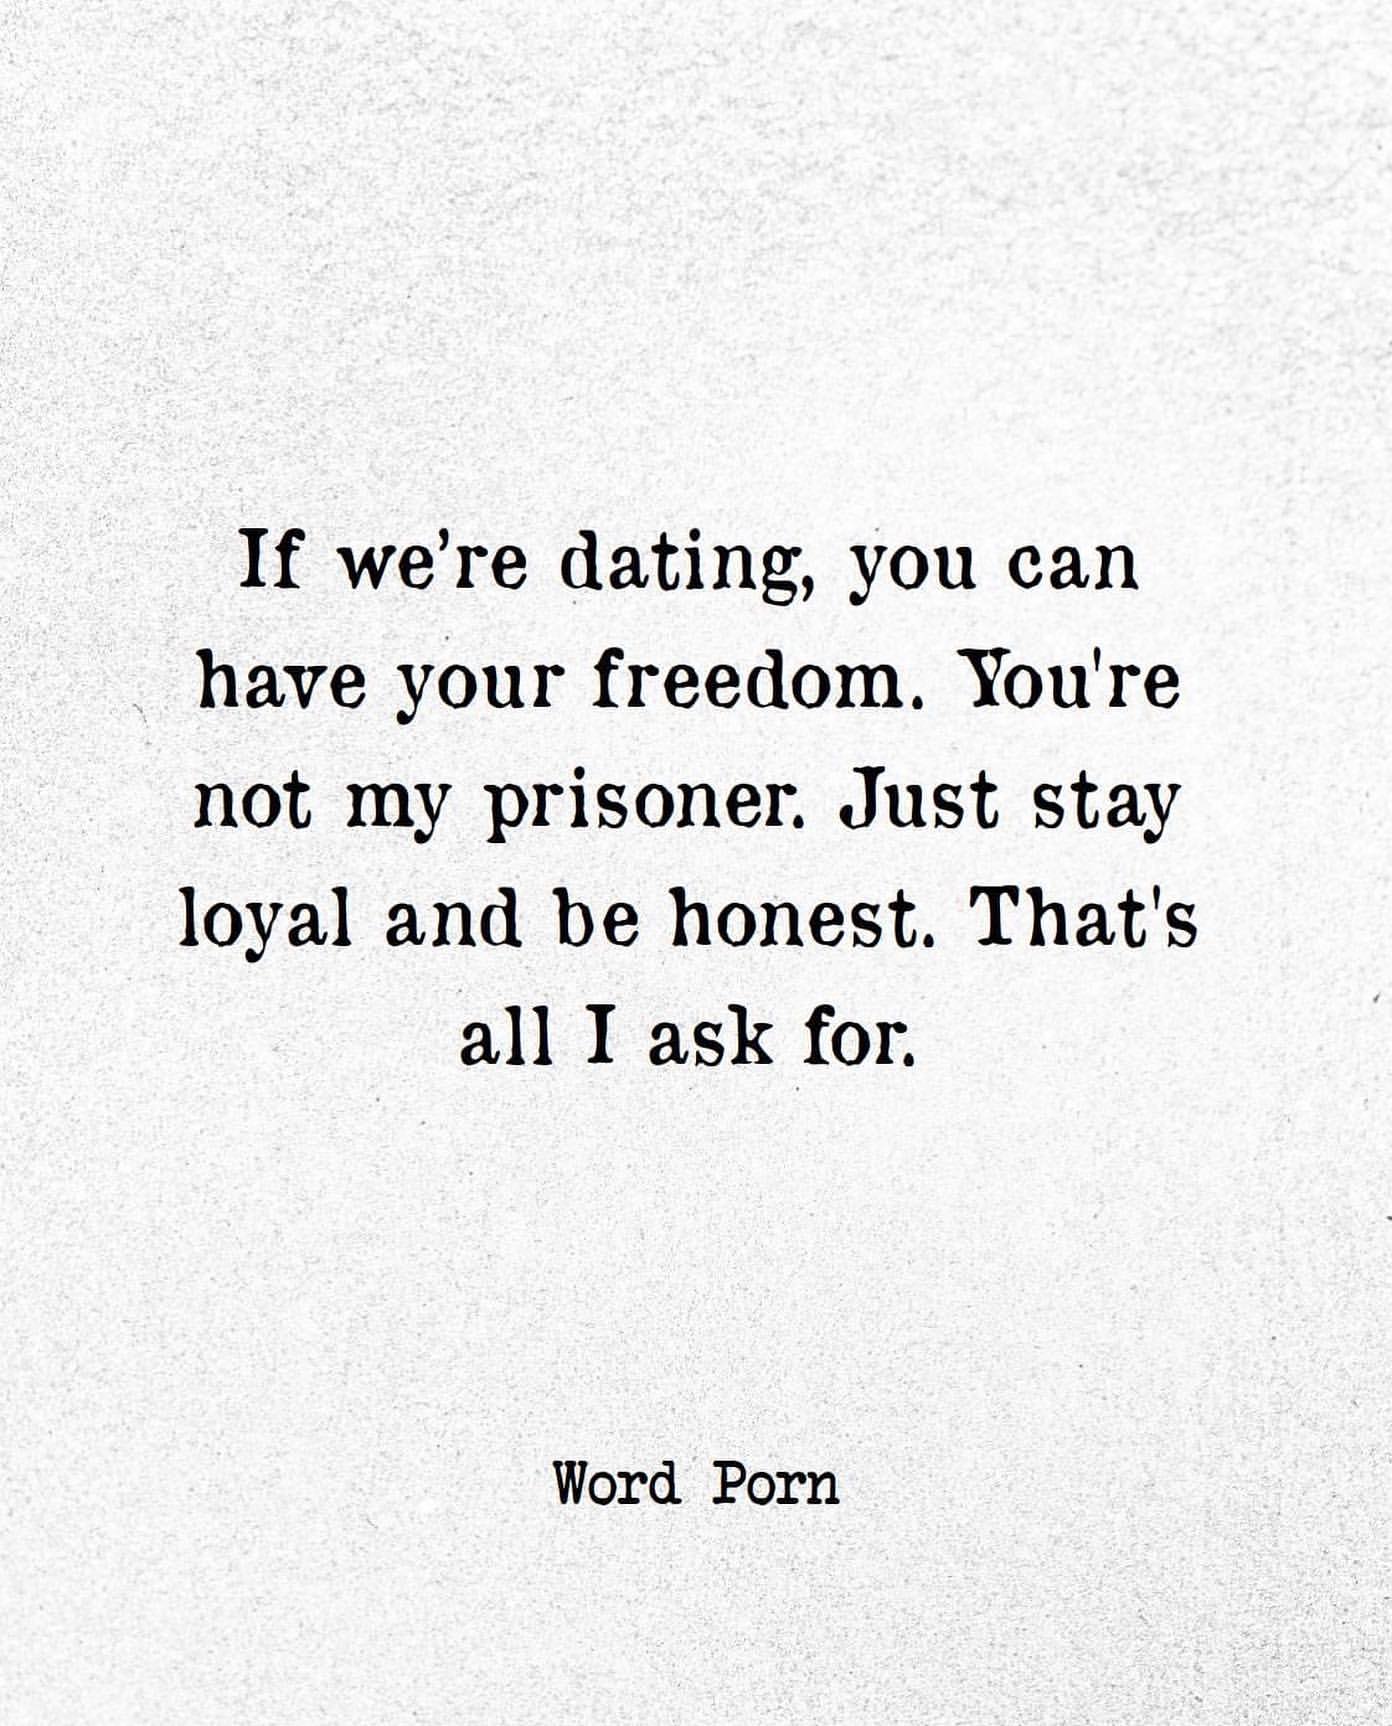 If we're dating, you can have your freedom. You're not my prisoner. Just stay loyal and be honest. That's all I ask for.